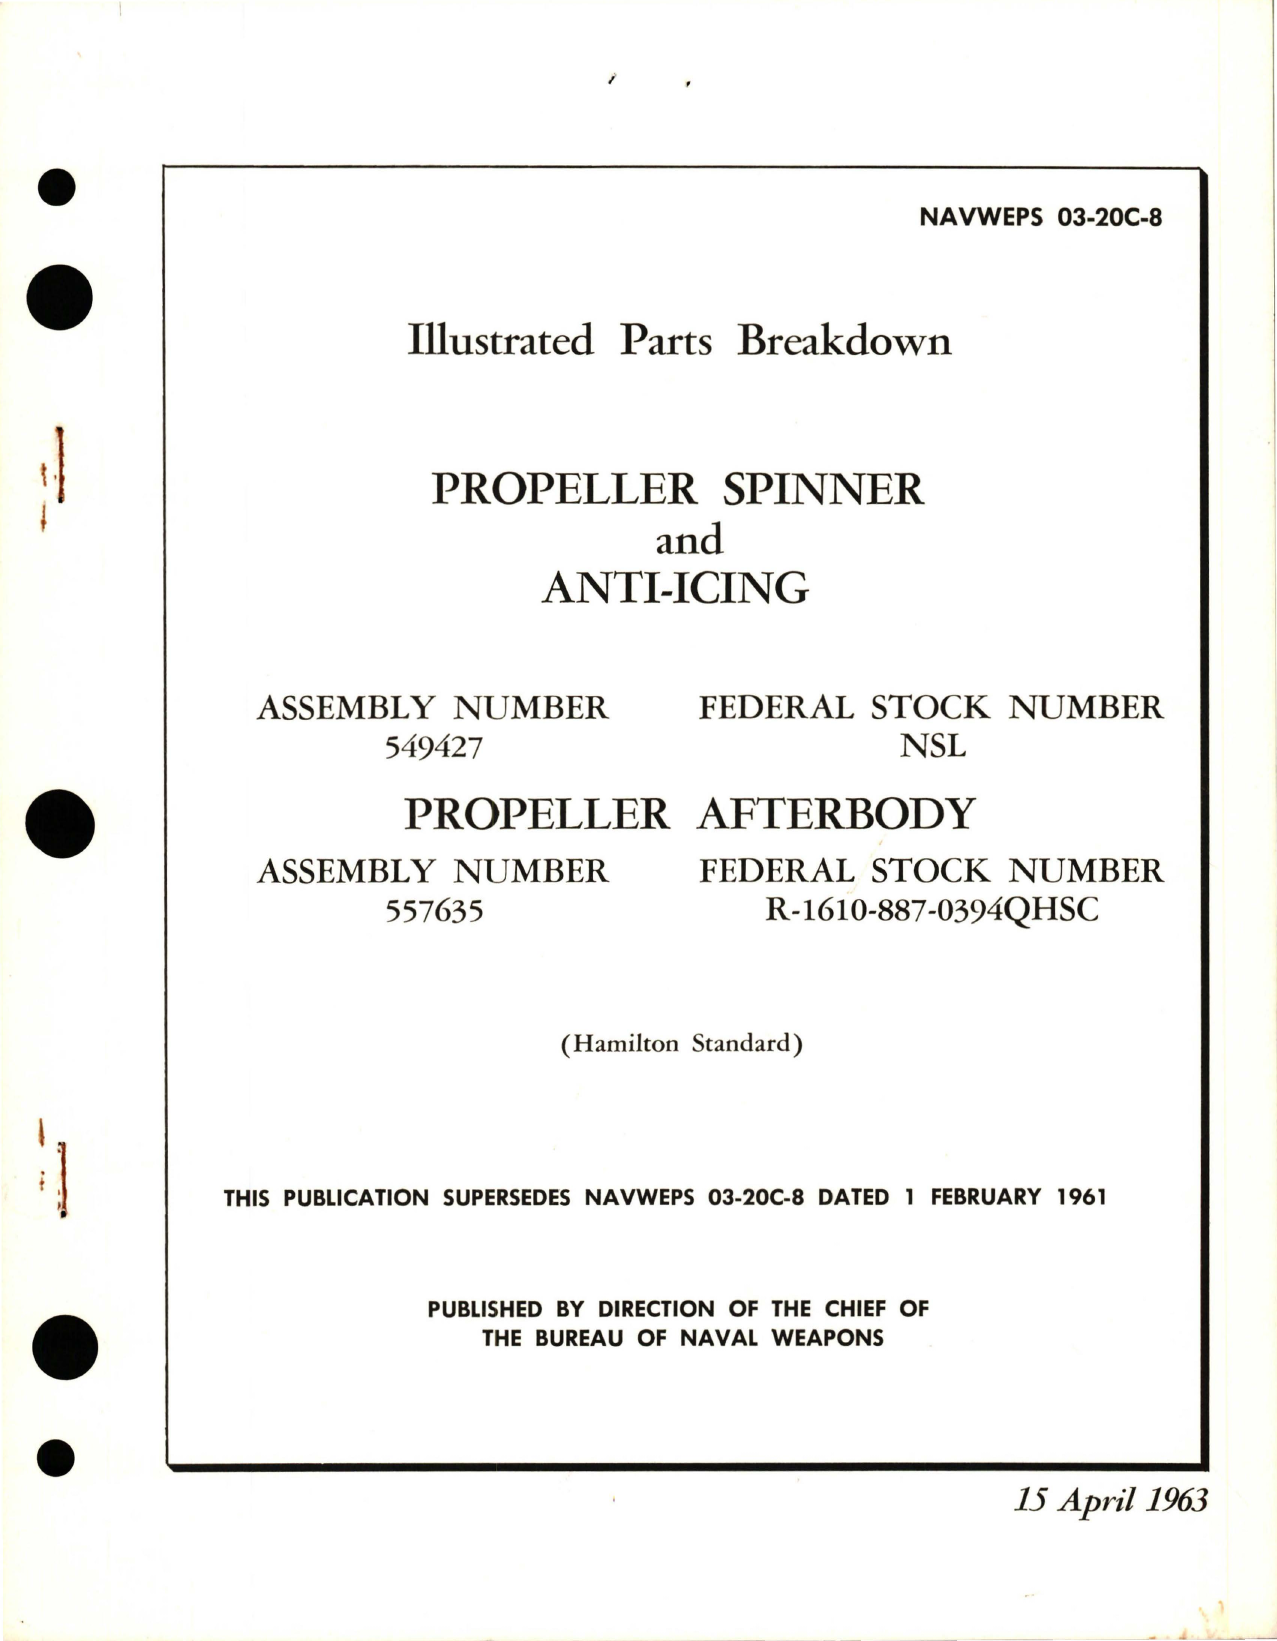 Sample page 1 from AirCorps Library document: Illustrated Parts Breakdown for Propeller Spinner, Anti-Icing and Propeller Afterbody